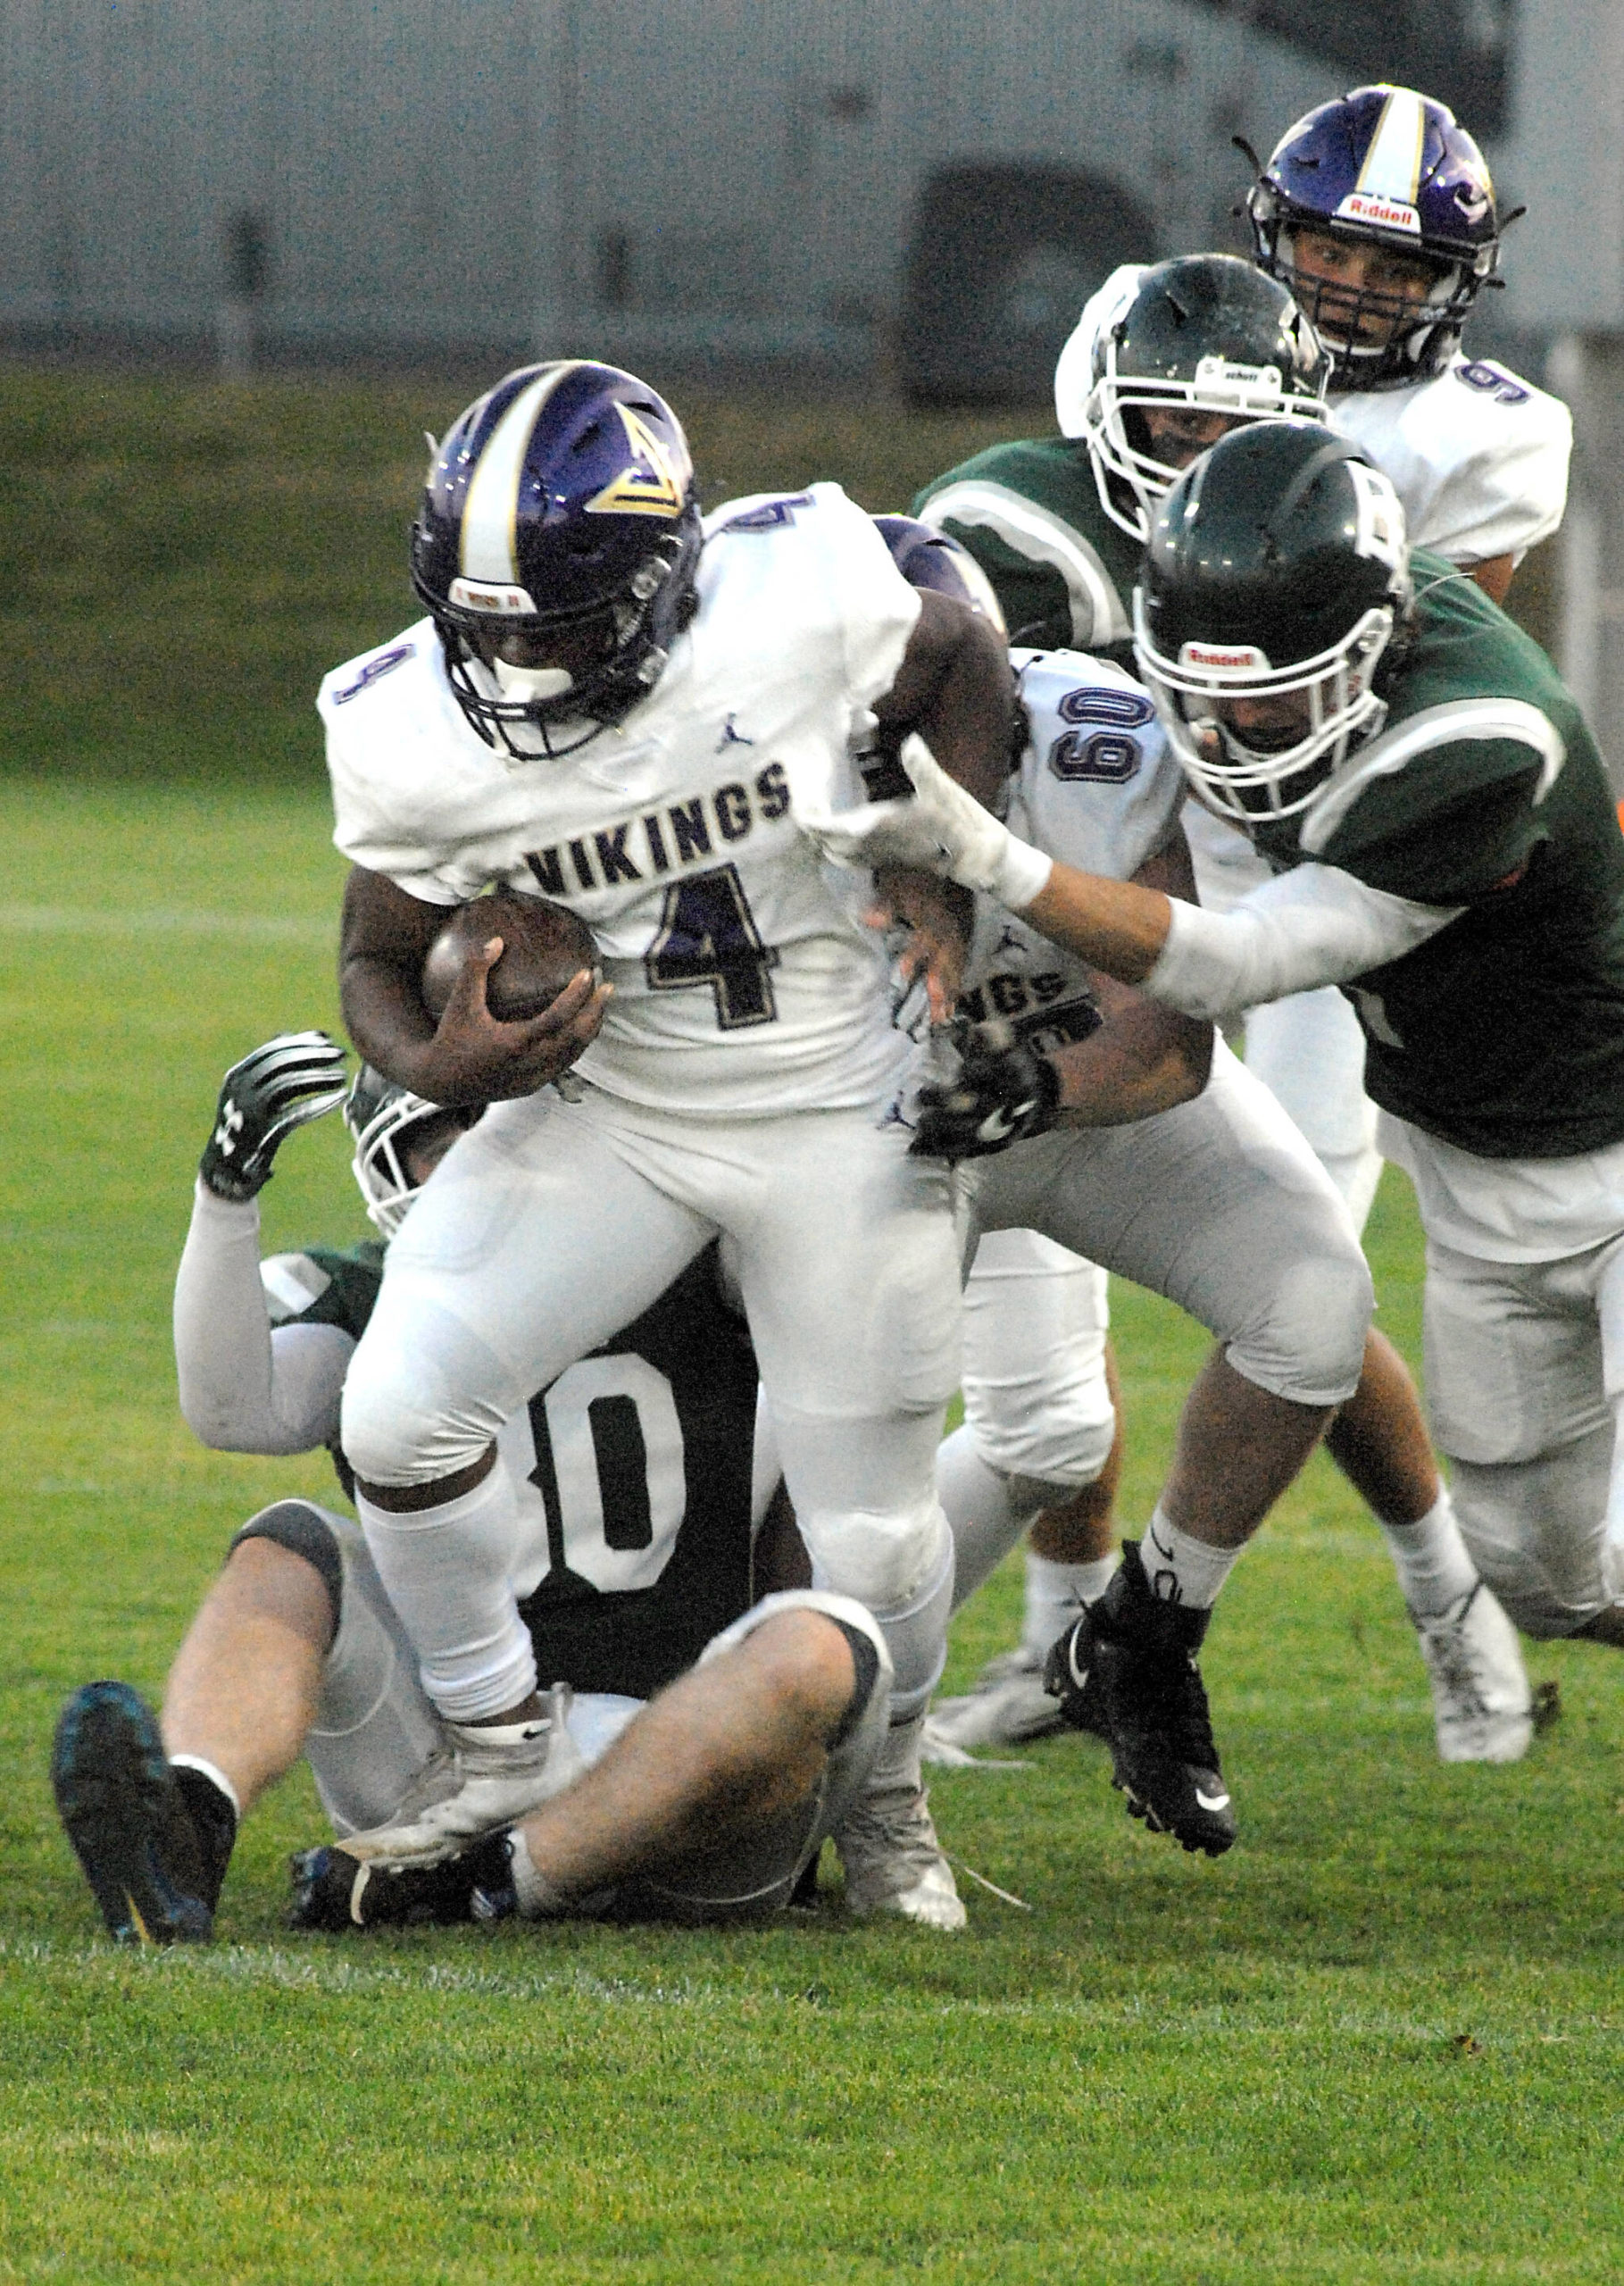 North Kitsap’s Zeke Harris, front, gets an assist from teammate Lincoln Hawkins before being wrapped up by the Port Angeles defense on Friday night at Port Angeles Civic Field. (Keith Thorpe/Peninsula Daily News)